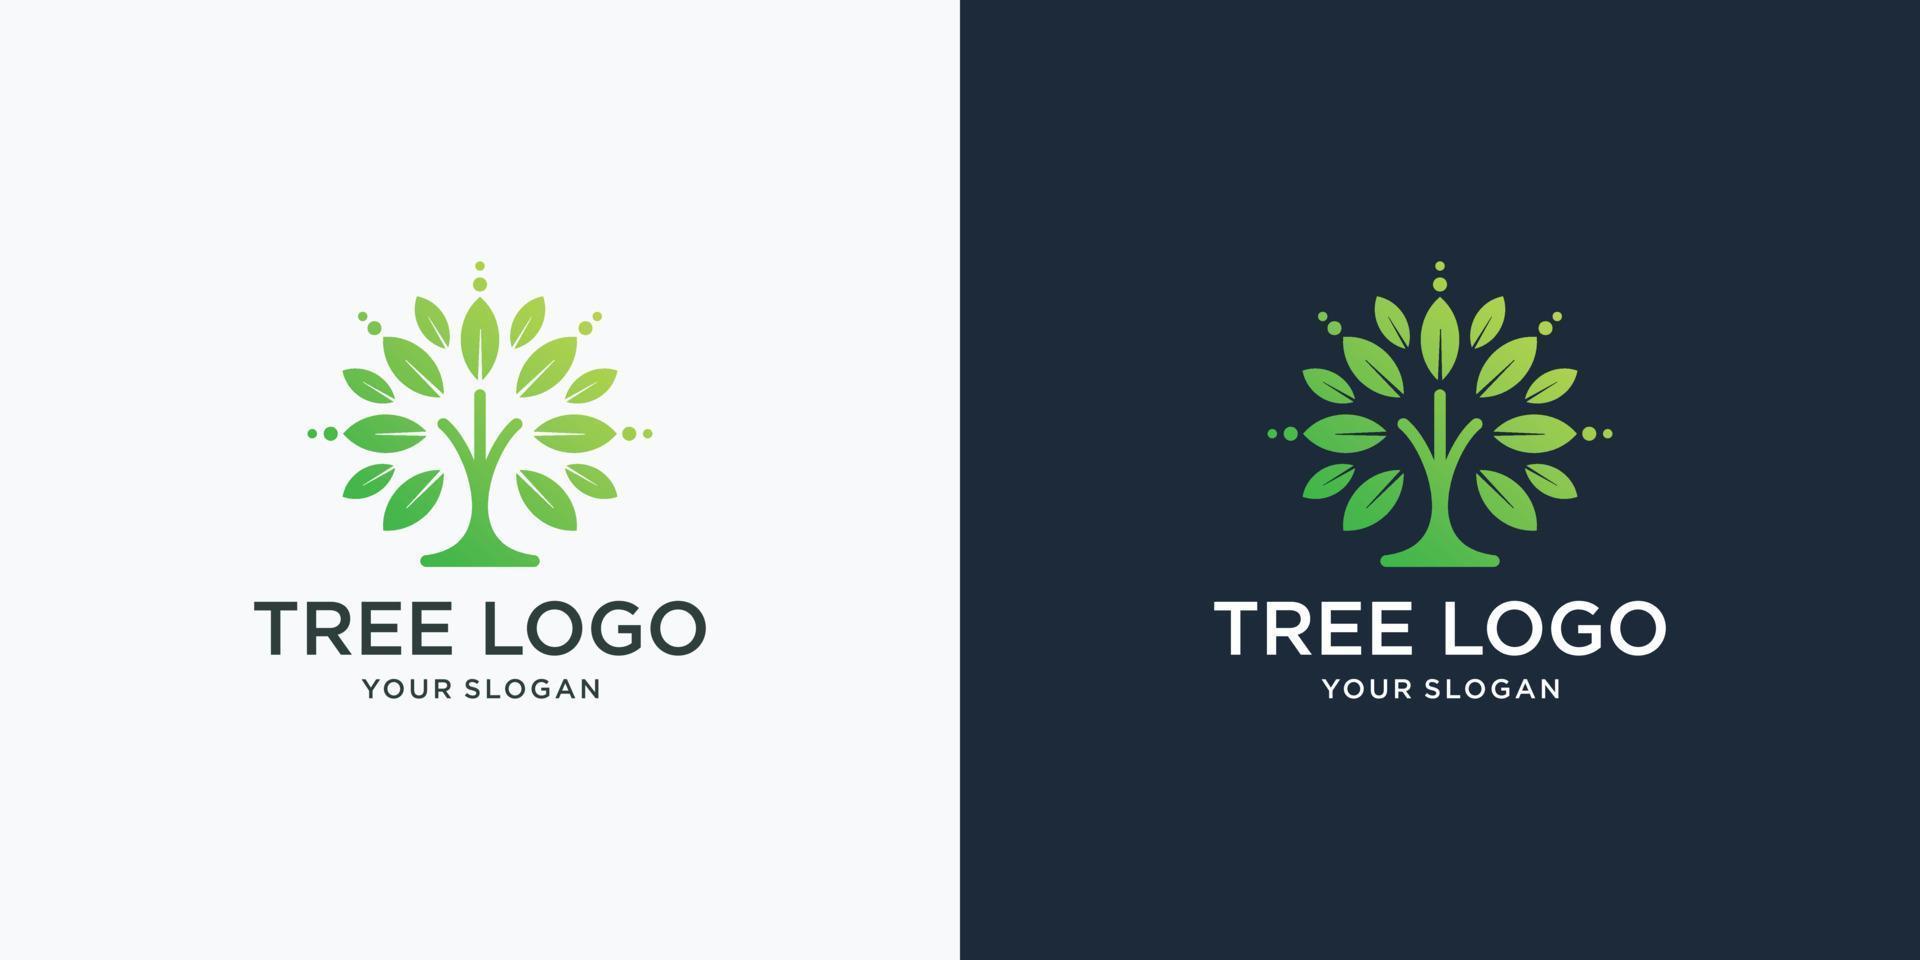 Tree logo icon design. Garden plant natural symbol.Tree of life branch with leaves and business card vector